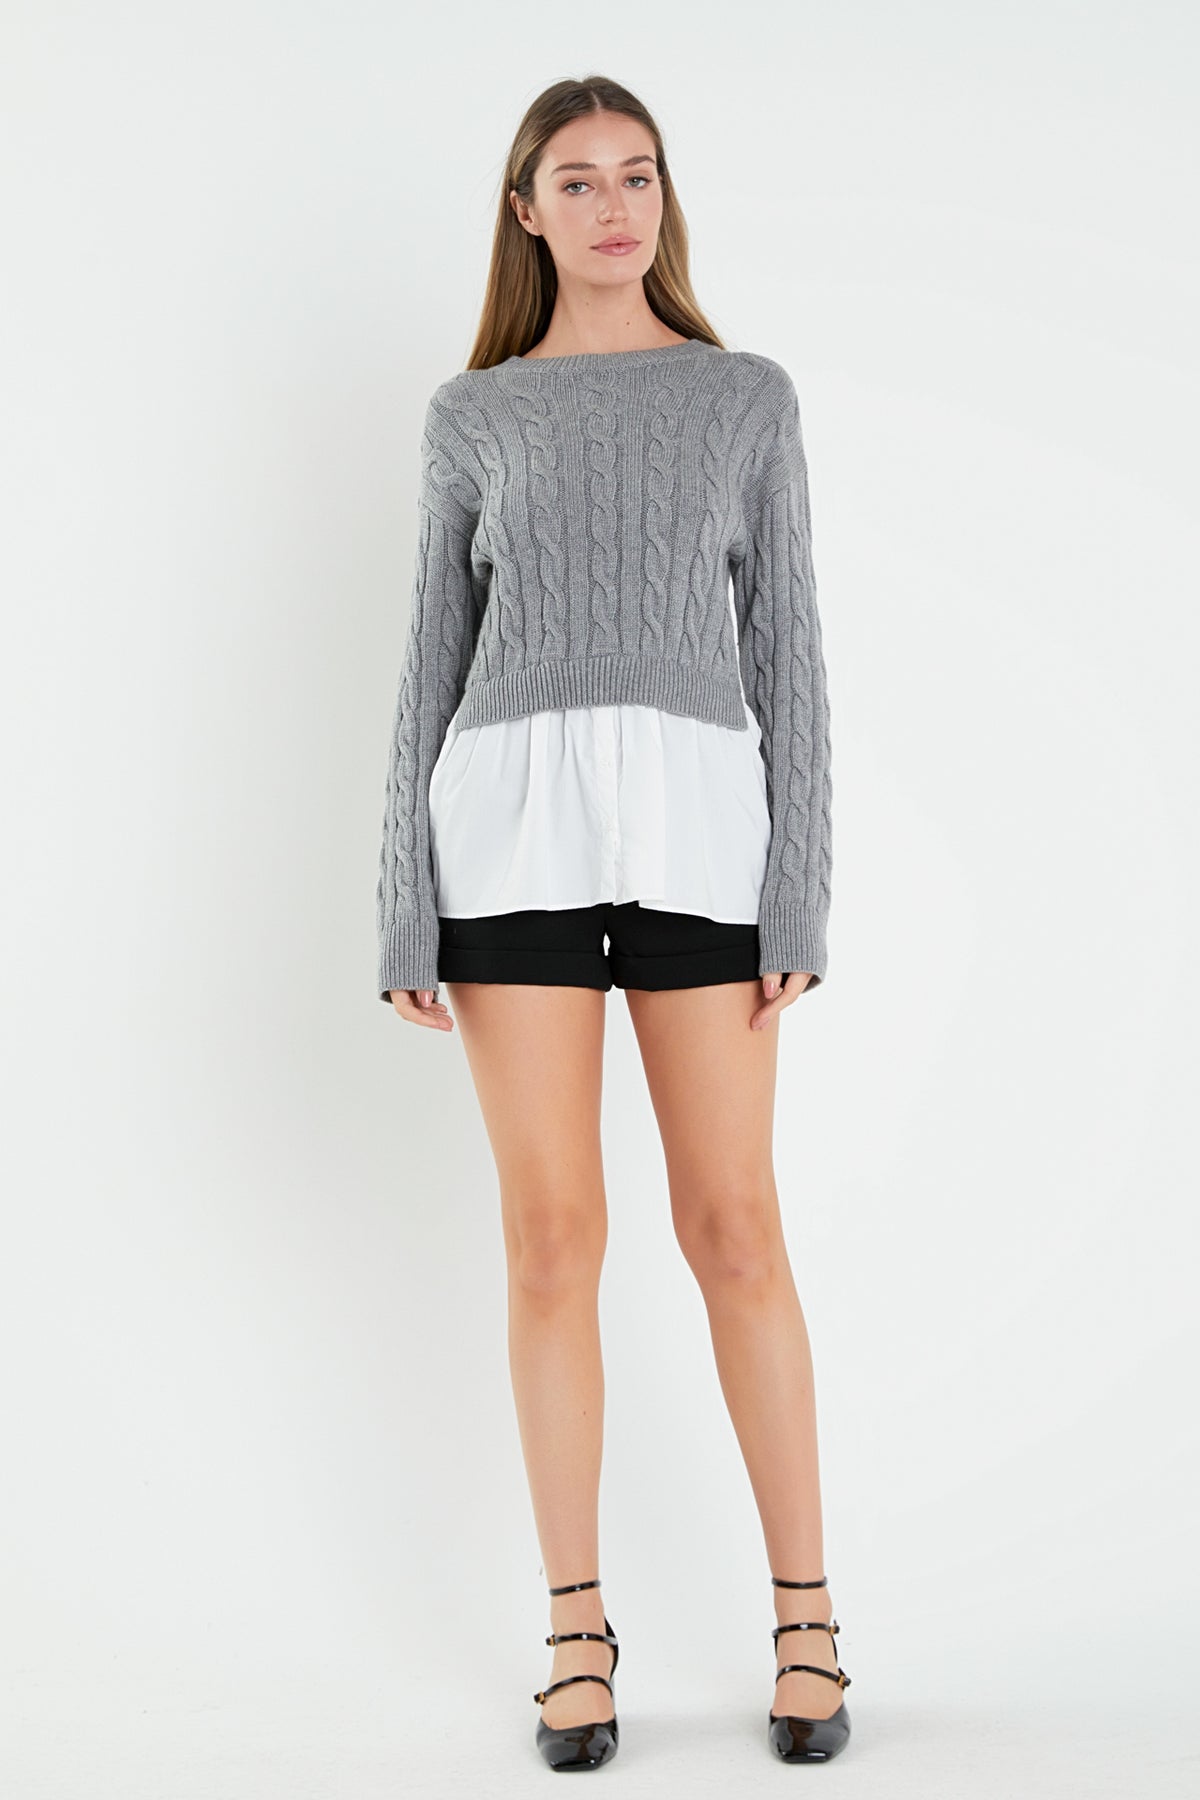 ENGLISH FACTORY - Mixed Media Sweater - SWEATERS & KNITS available at Objectrare